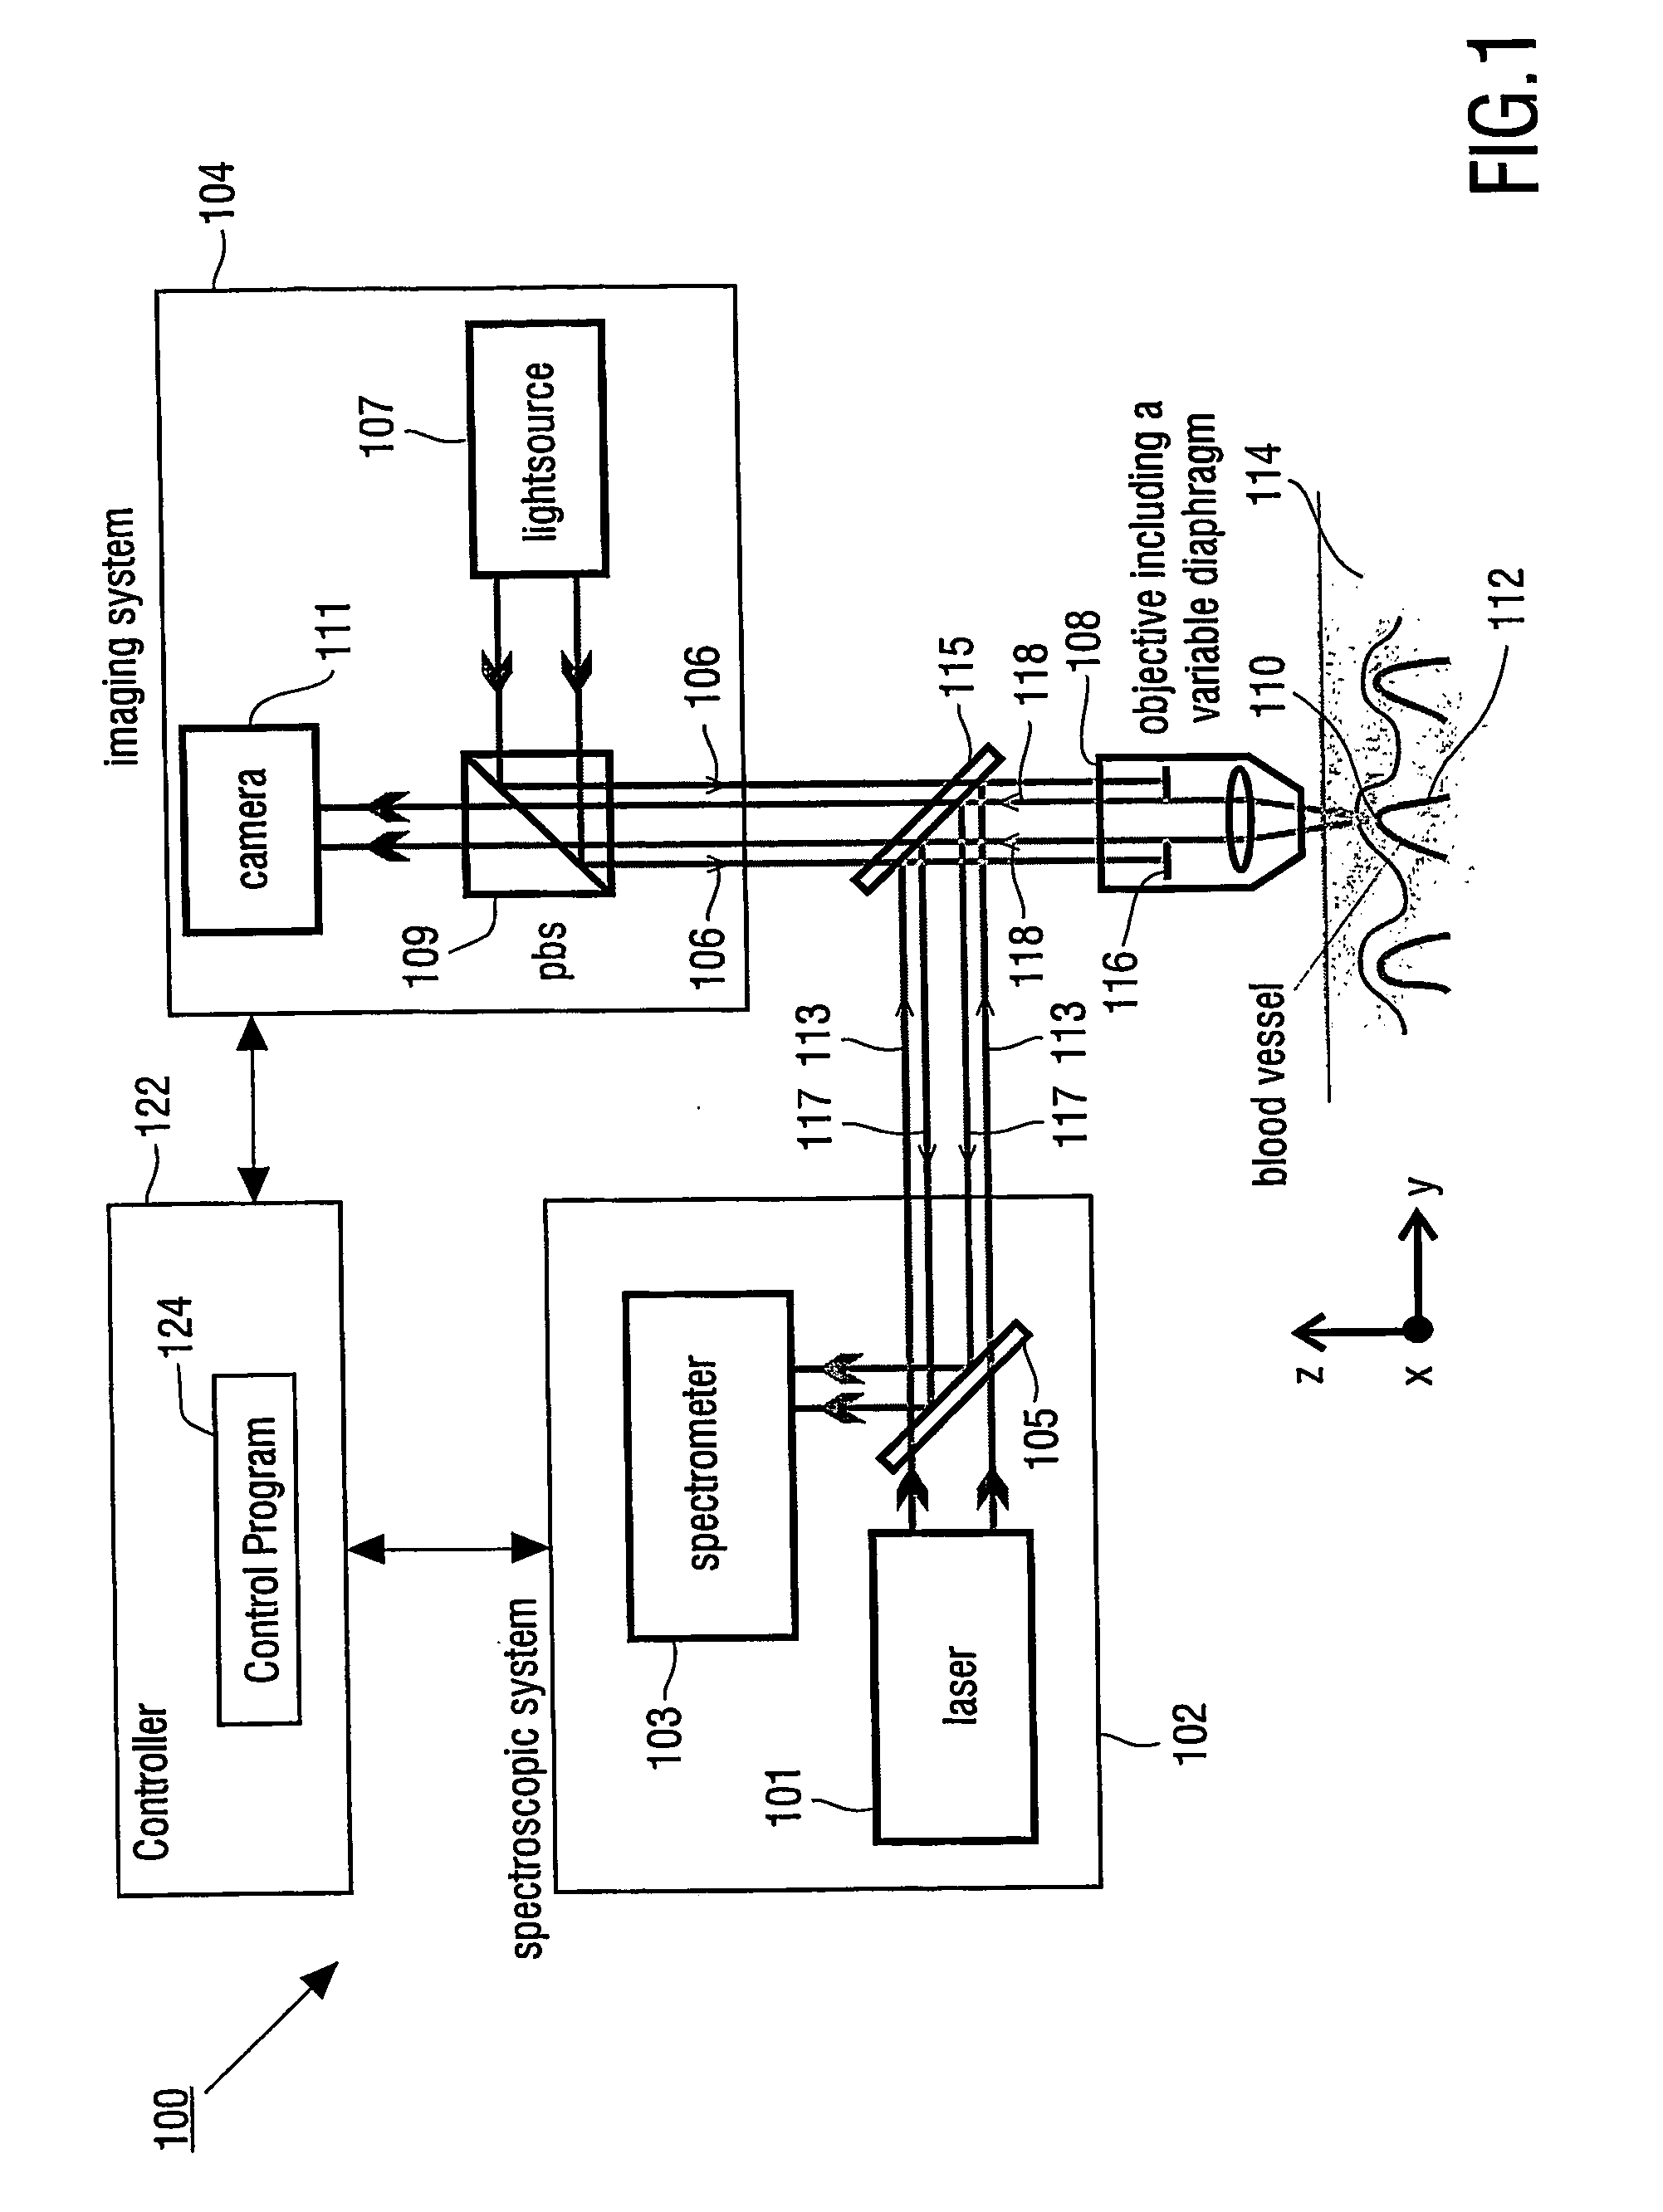 Method and apparatus for determining a property of a fluid which flows through a biological tubular structure with variable numerical aperture